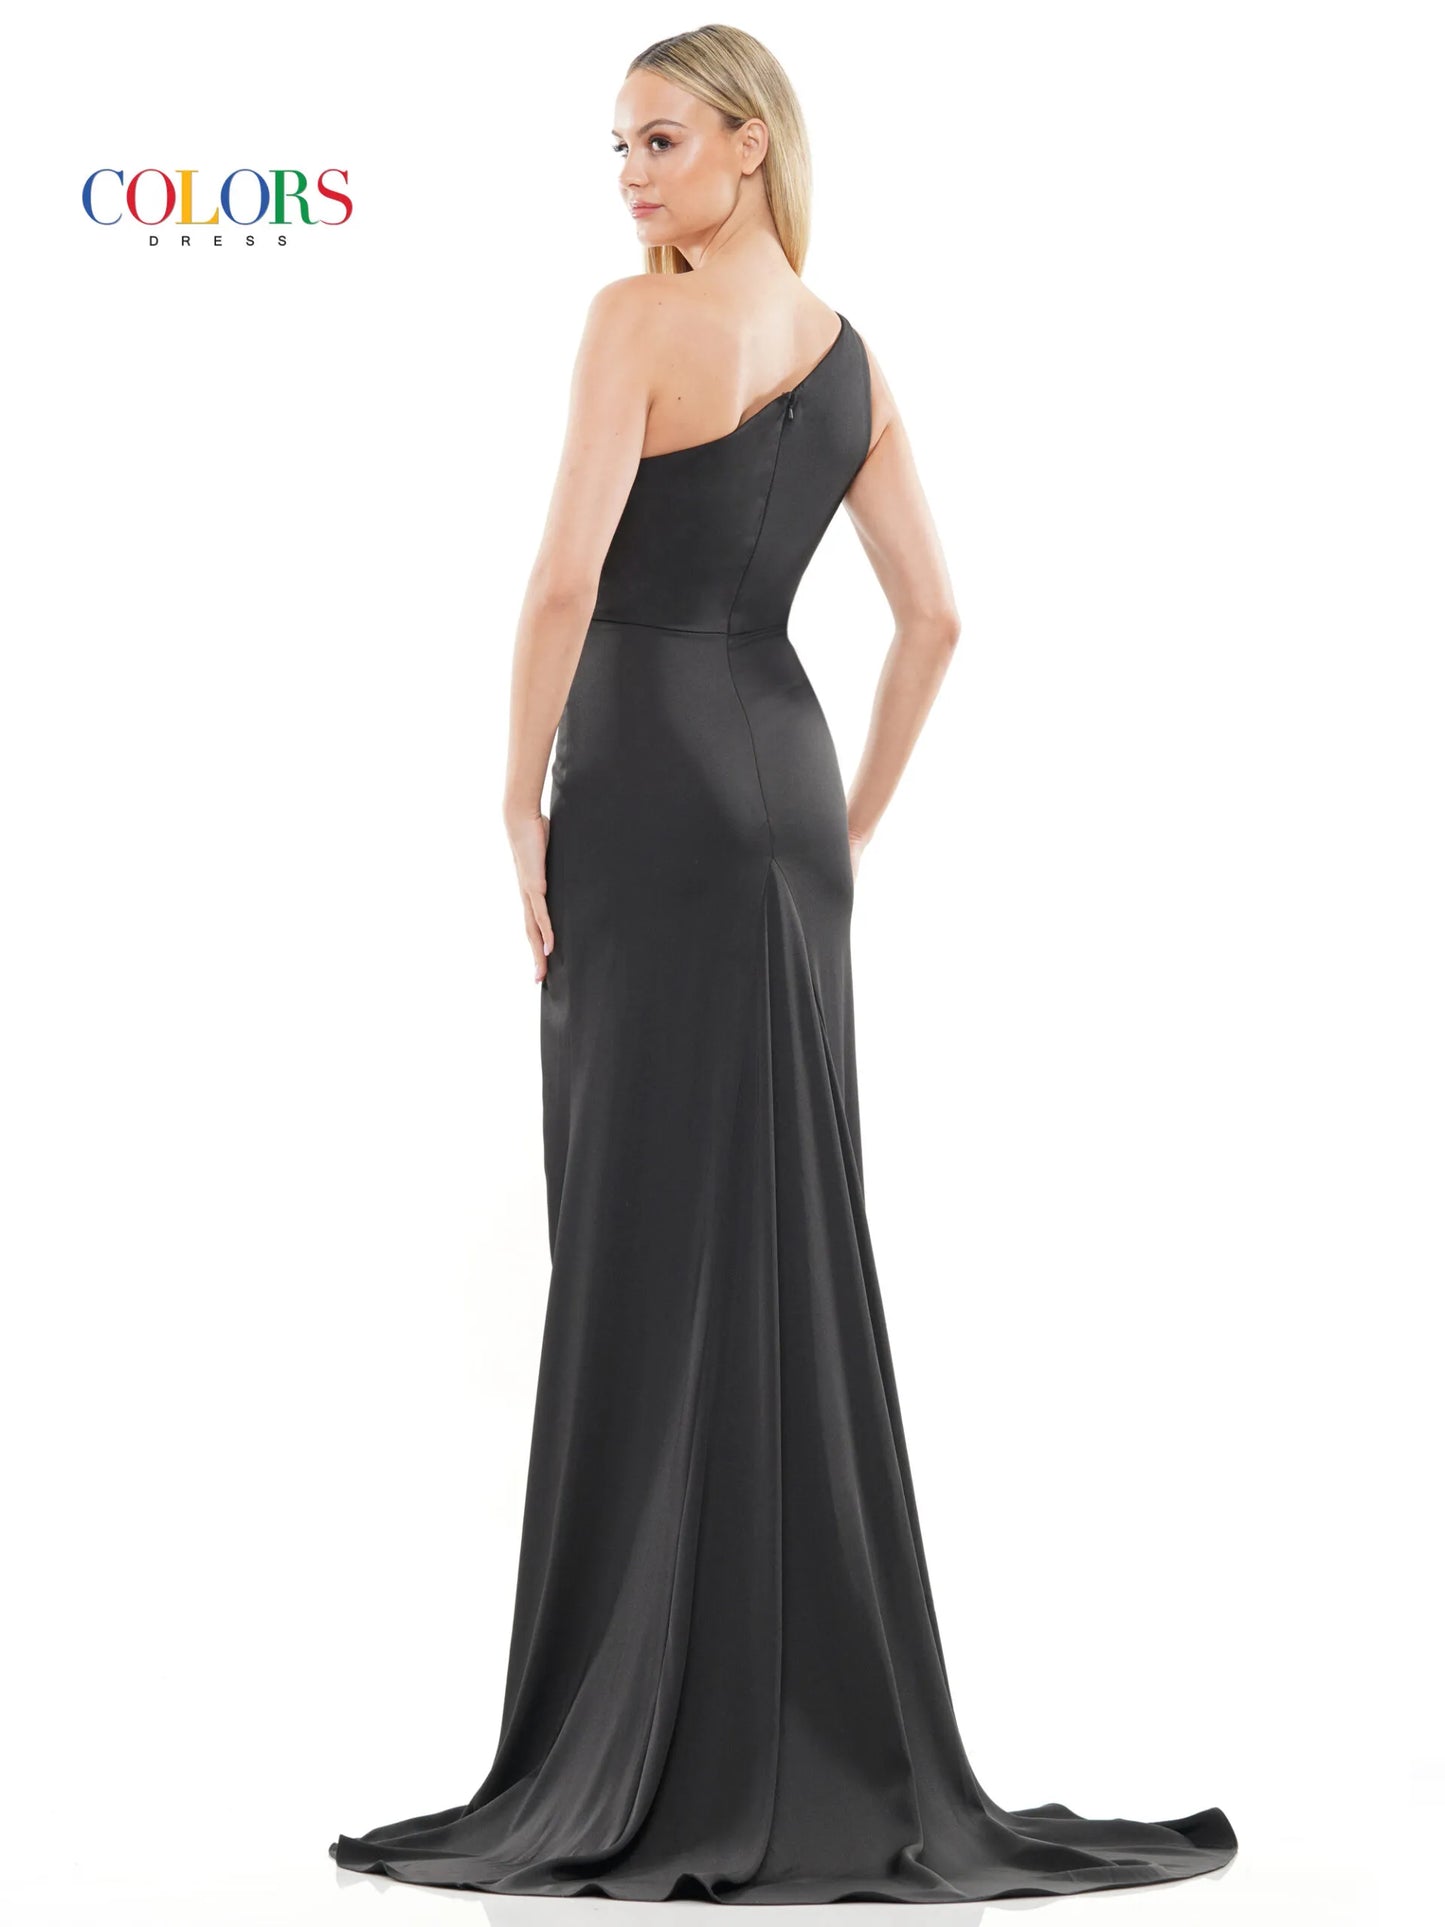 Step into the spotlight with the Colors Dress 3090 Long Prom Dress. Its one-shoulder design, illusion cut-out, and high slit train create a stunning silhouette, perfect for formal events and pageants. Made with precision and quality materials, this fitted gown will make you shine.